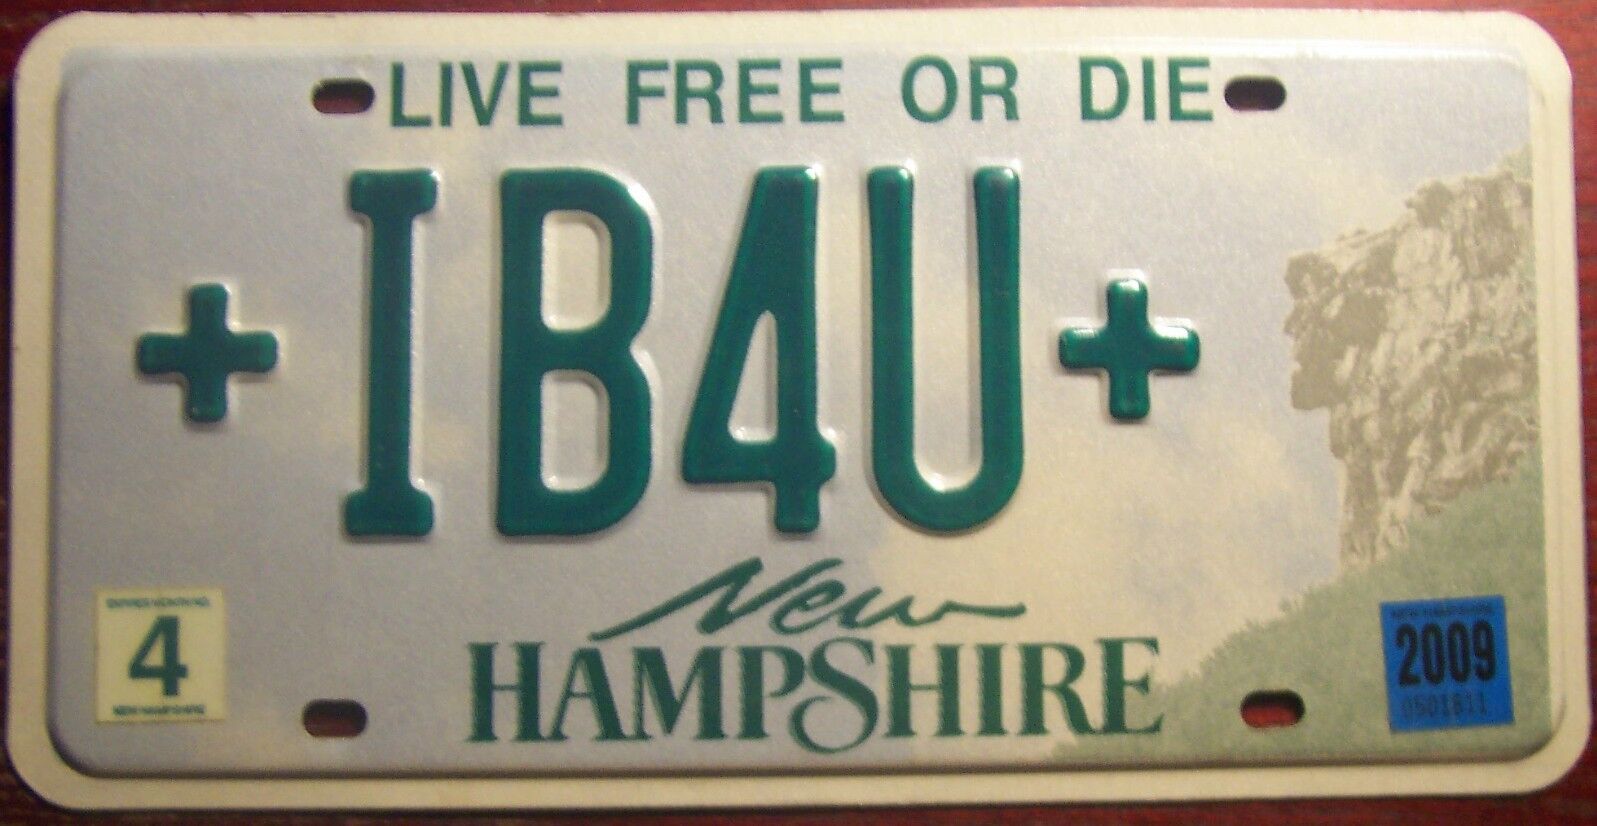 2009 NEW HAMPSHIRE VANITY PERSONALIZED LICENSE PLATE I AM FOR YOU I BE 4 U 